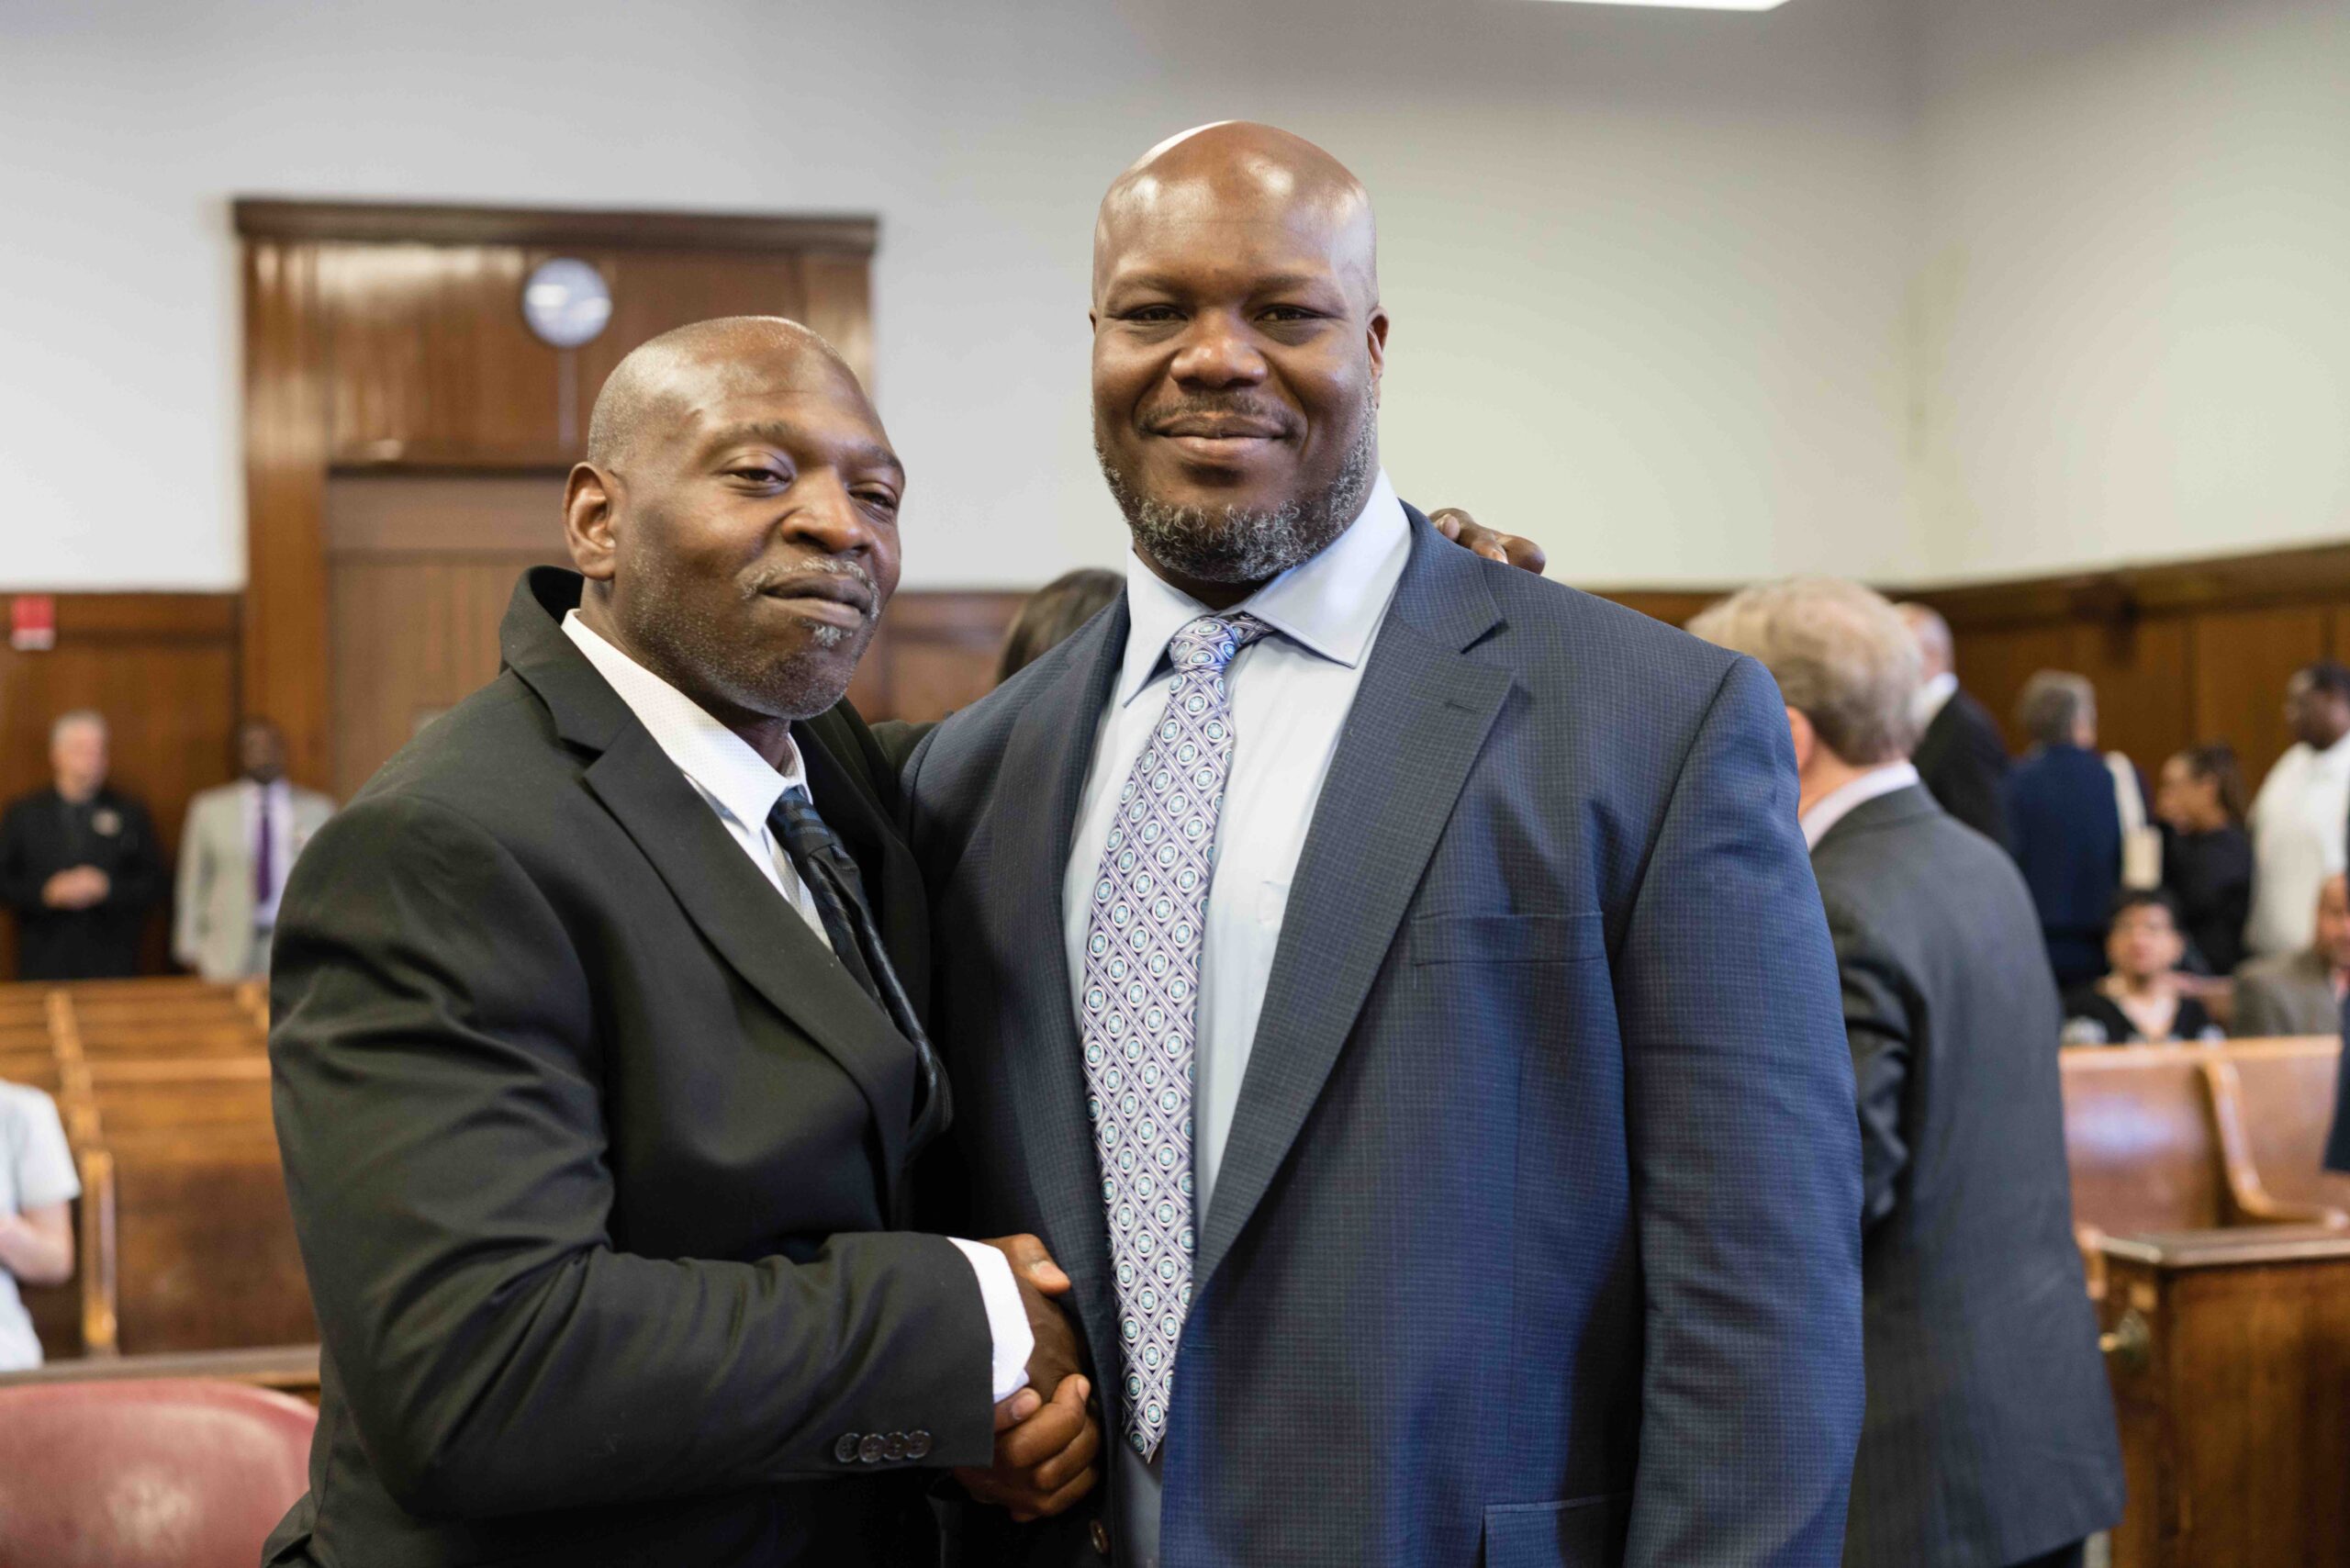 VanDyke Perry and Gregory Counts at their exoneration. Photo by Sameer Abdel-Khalek.